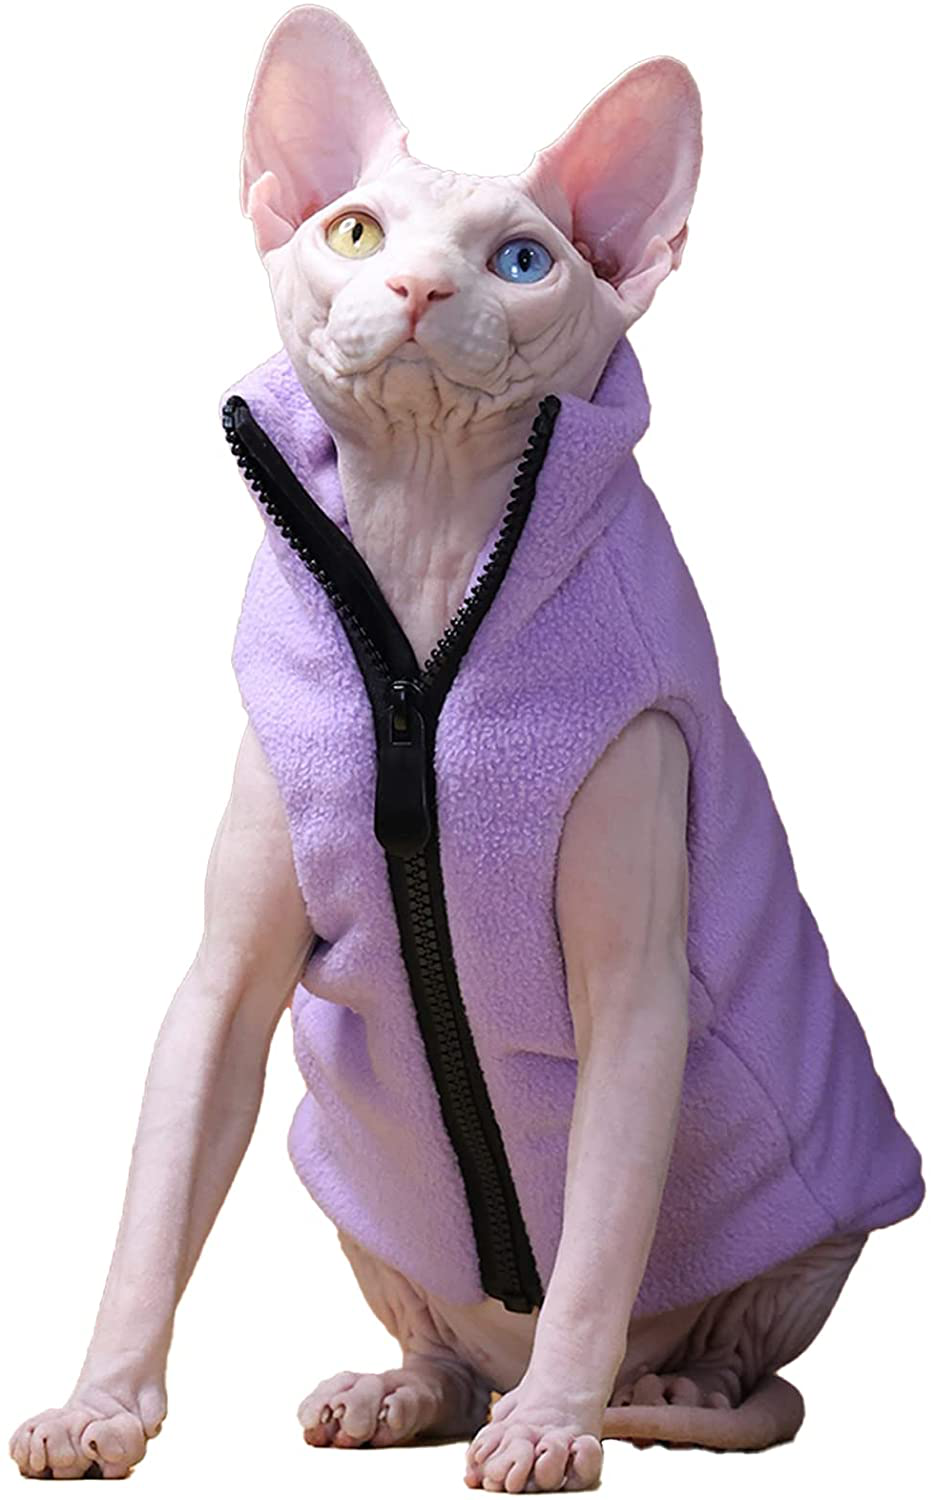 Sphynx Hairless Cat Clothes Autumn Winter Fashion Solid Color Zipper Coat Sleeveless High Collar Soft Faux Fur Sweater Outfit with Pocket Animals & Pet Supplies > Pet Supplies > Cat Supplies > Cat Apparel WQCXYHW Purple L（6.6-8.8lbs） 